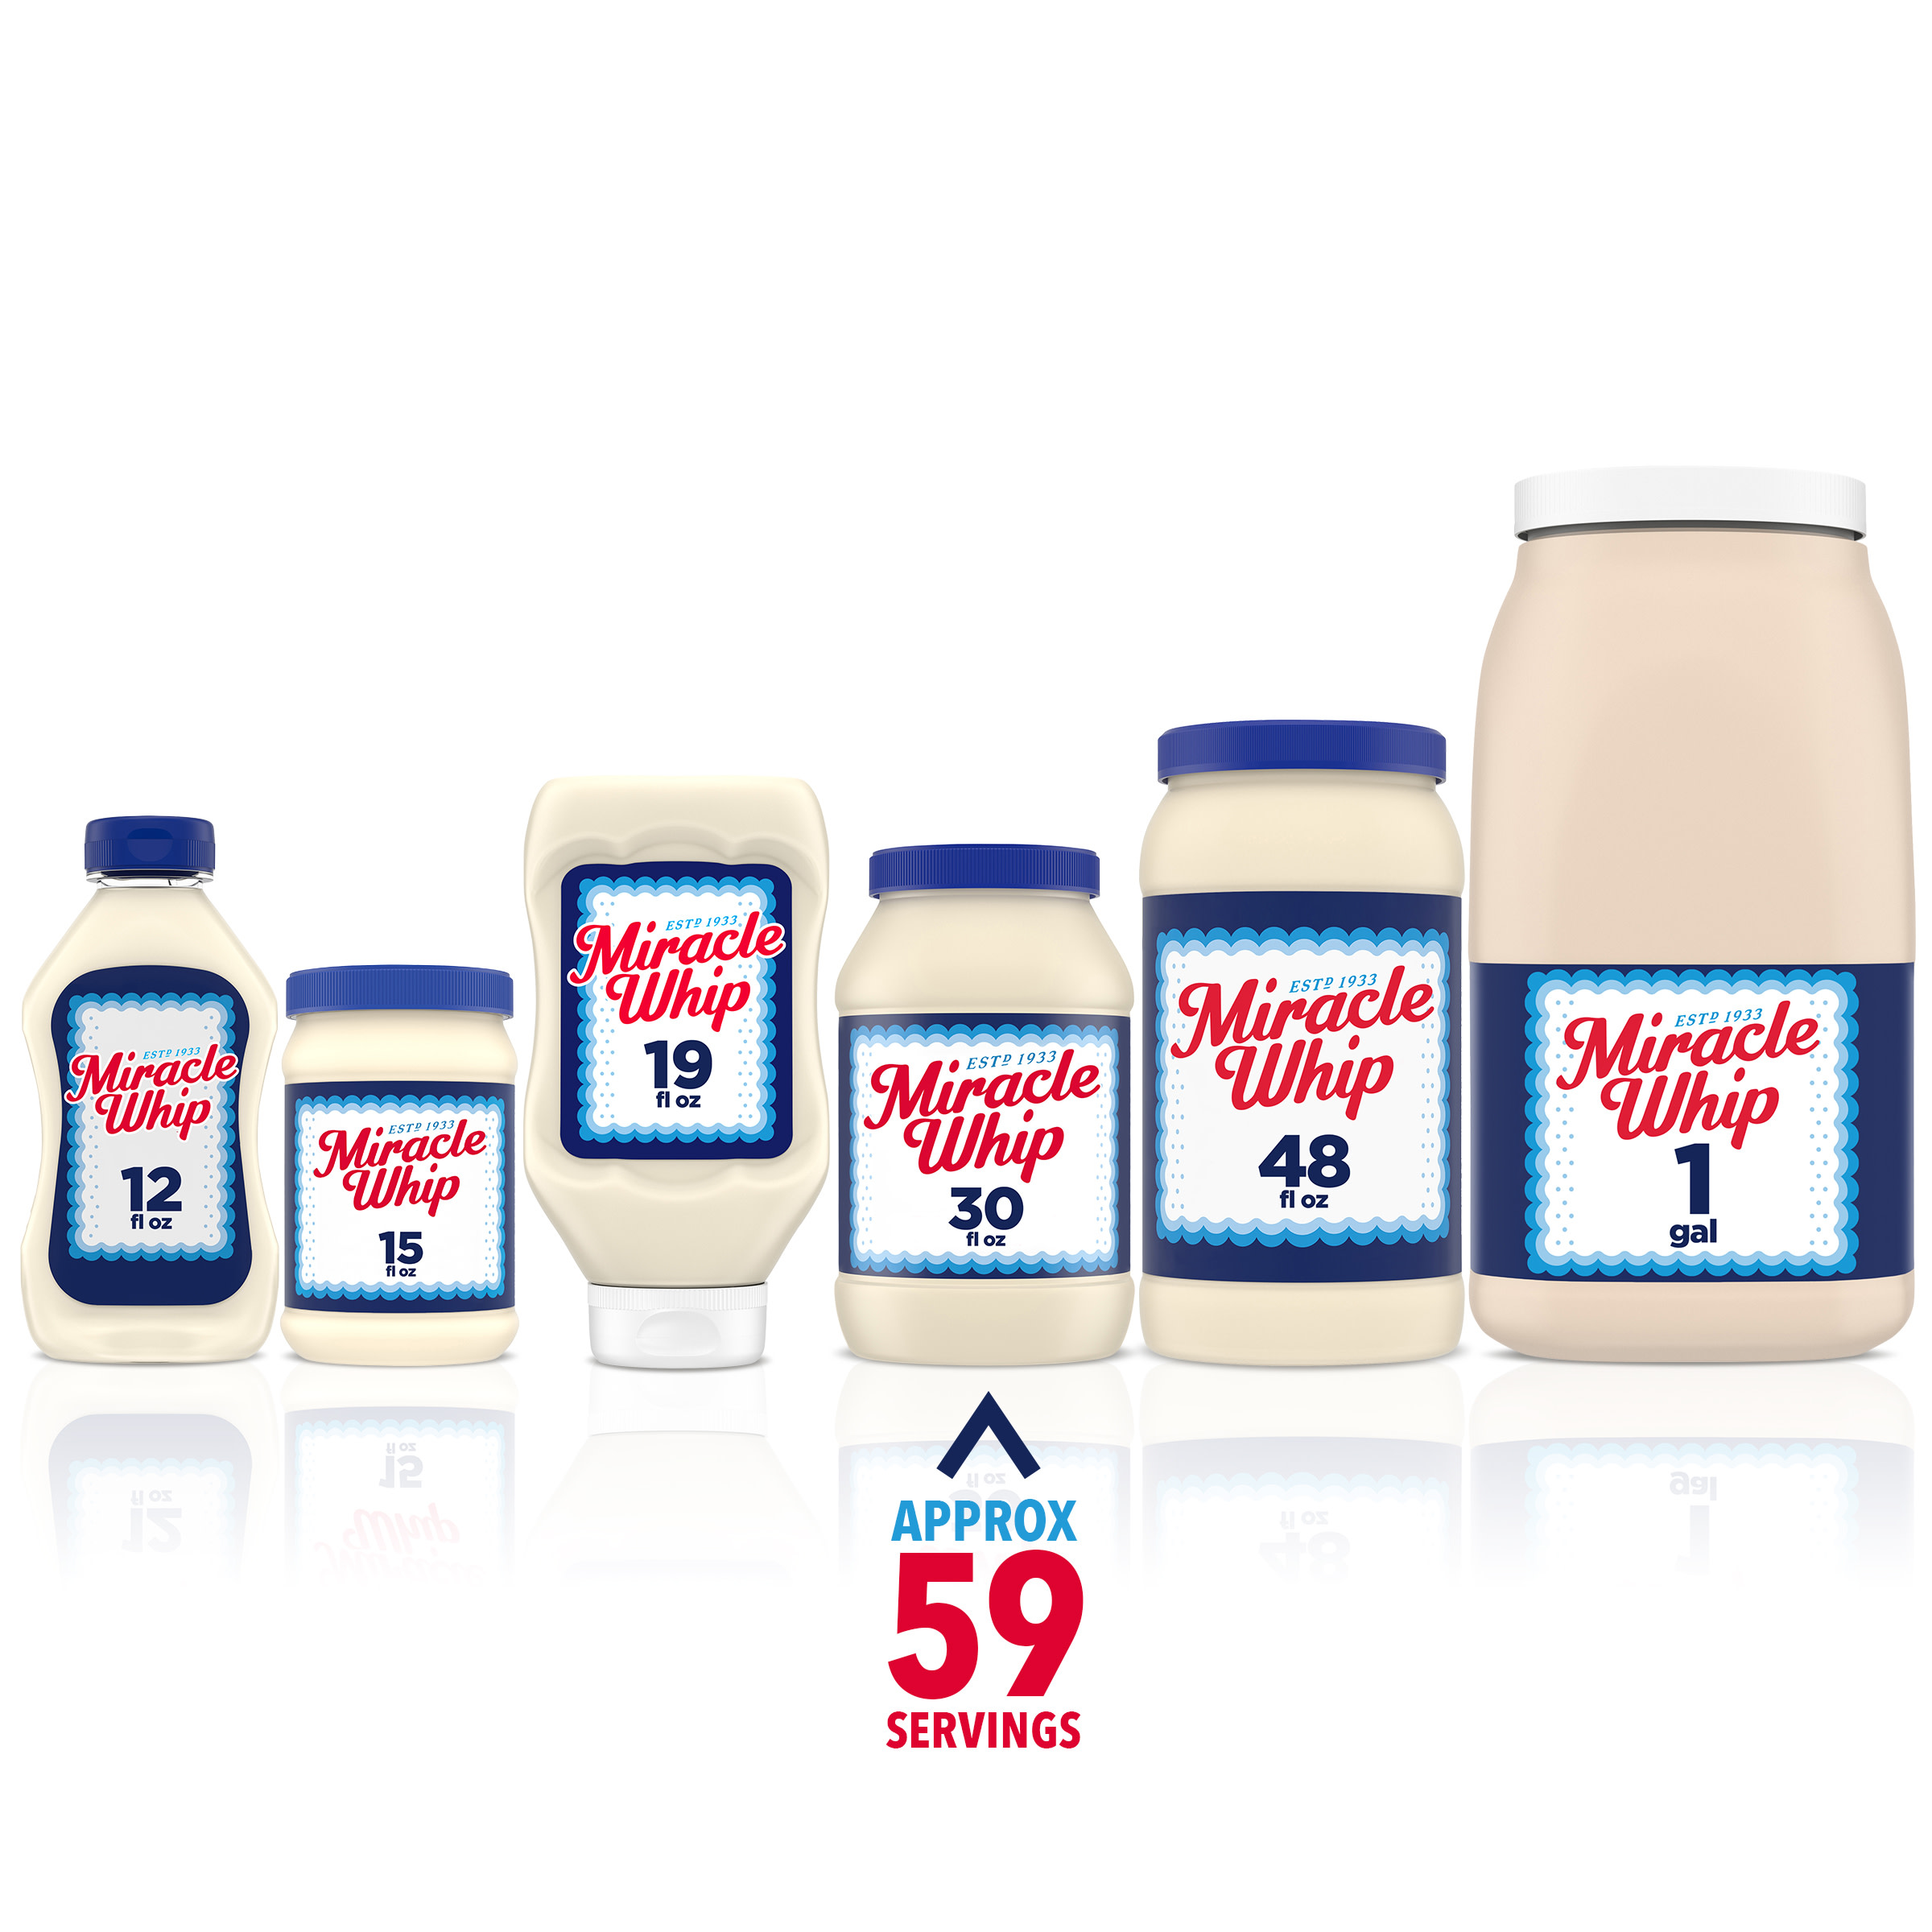 Miracle Whip Mayo-like Dressing, for a Keto and Low Carb Lifestyle, 30 fl oz Jar - image 4 of 18